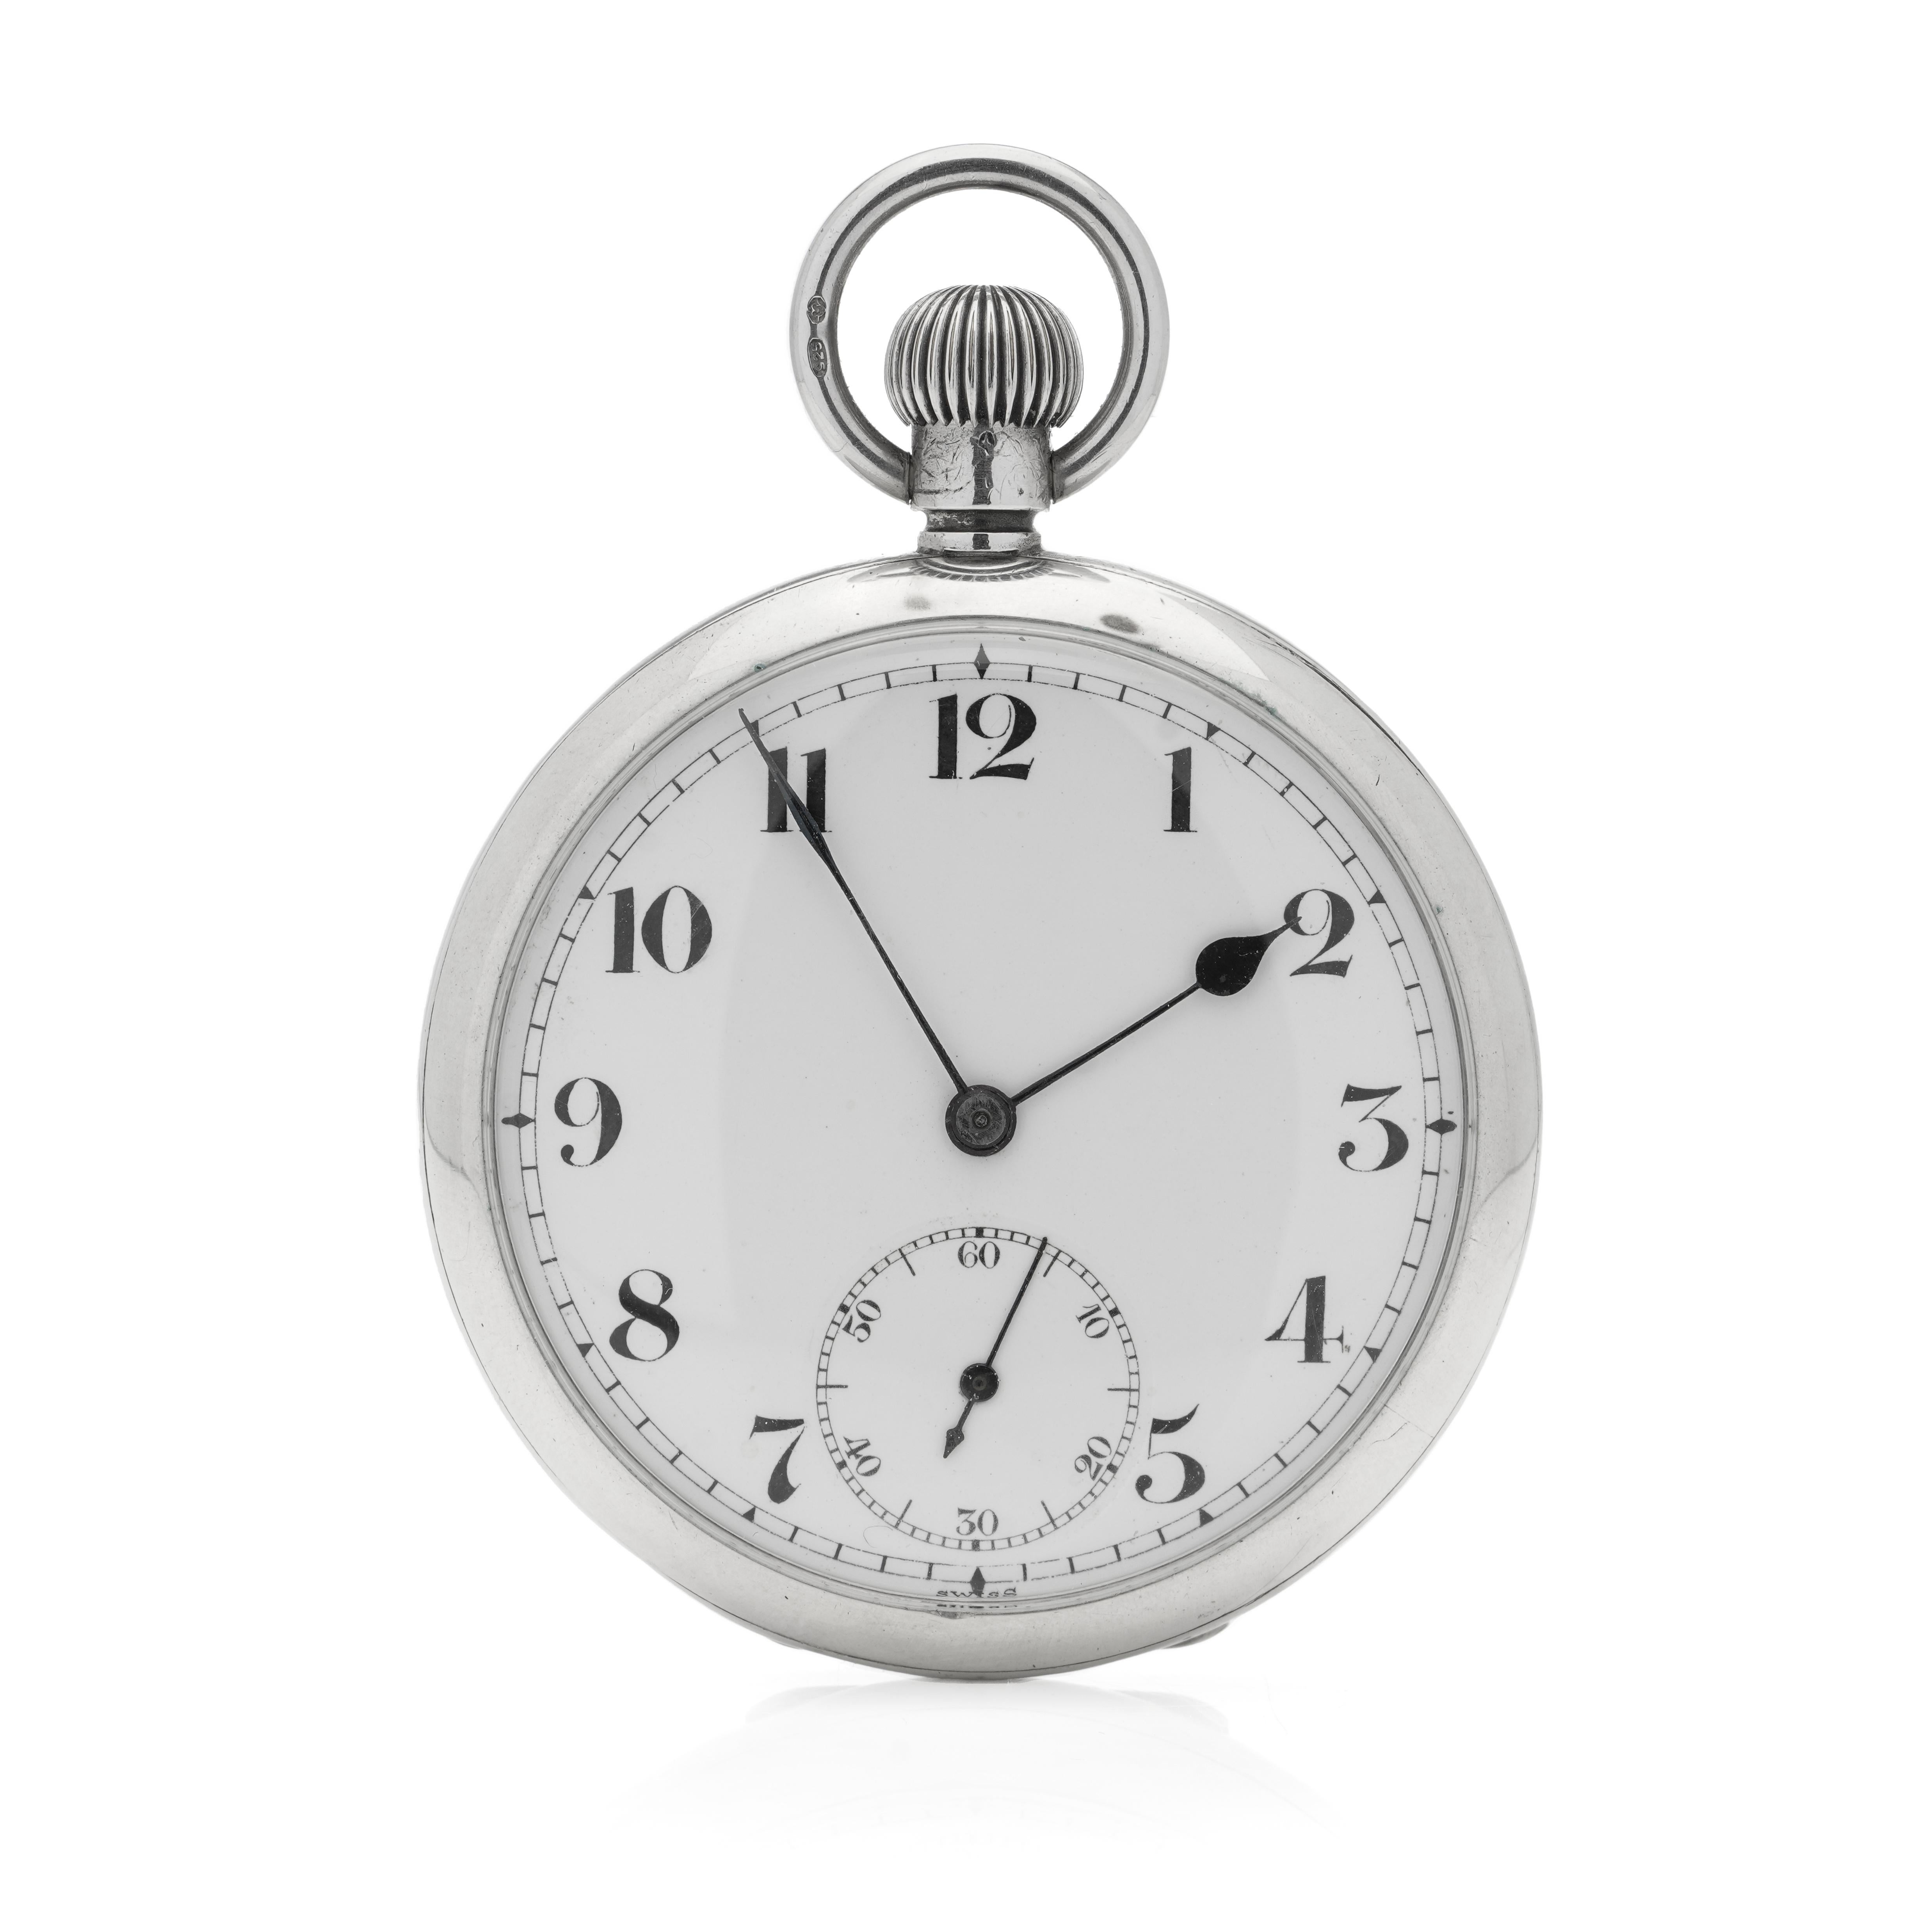 An antique Wilsdorf & Davis ( early Rolex ) sterling 925 silver round pocket watch.
Made in Switzerland.
Case Made in England, 1919
Case has been numbered.
Dial colour: White
Glass: Plexiglass
Numerals: Roman numbers
Fully